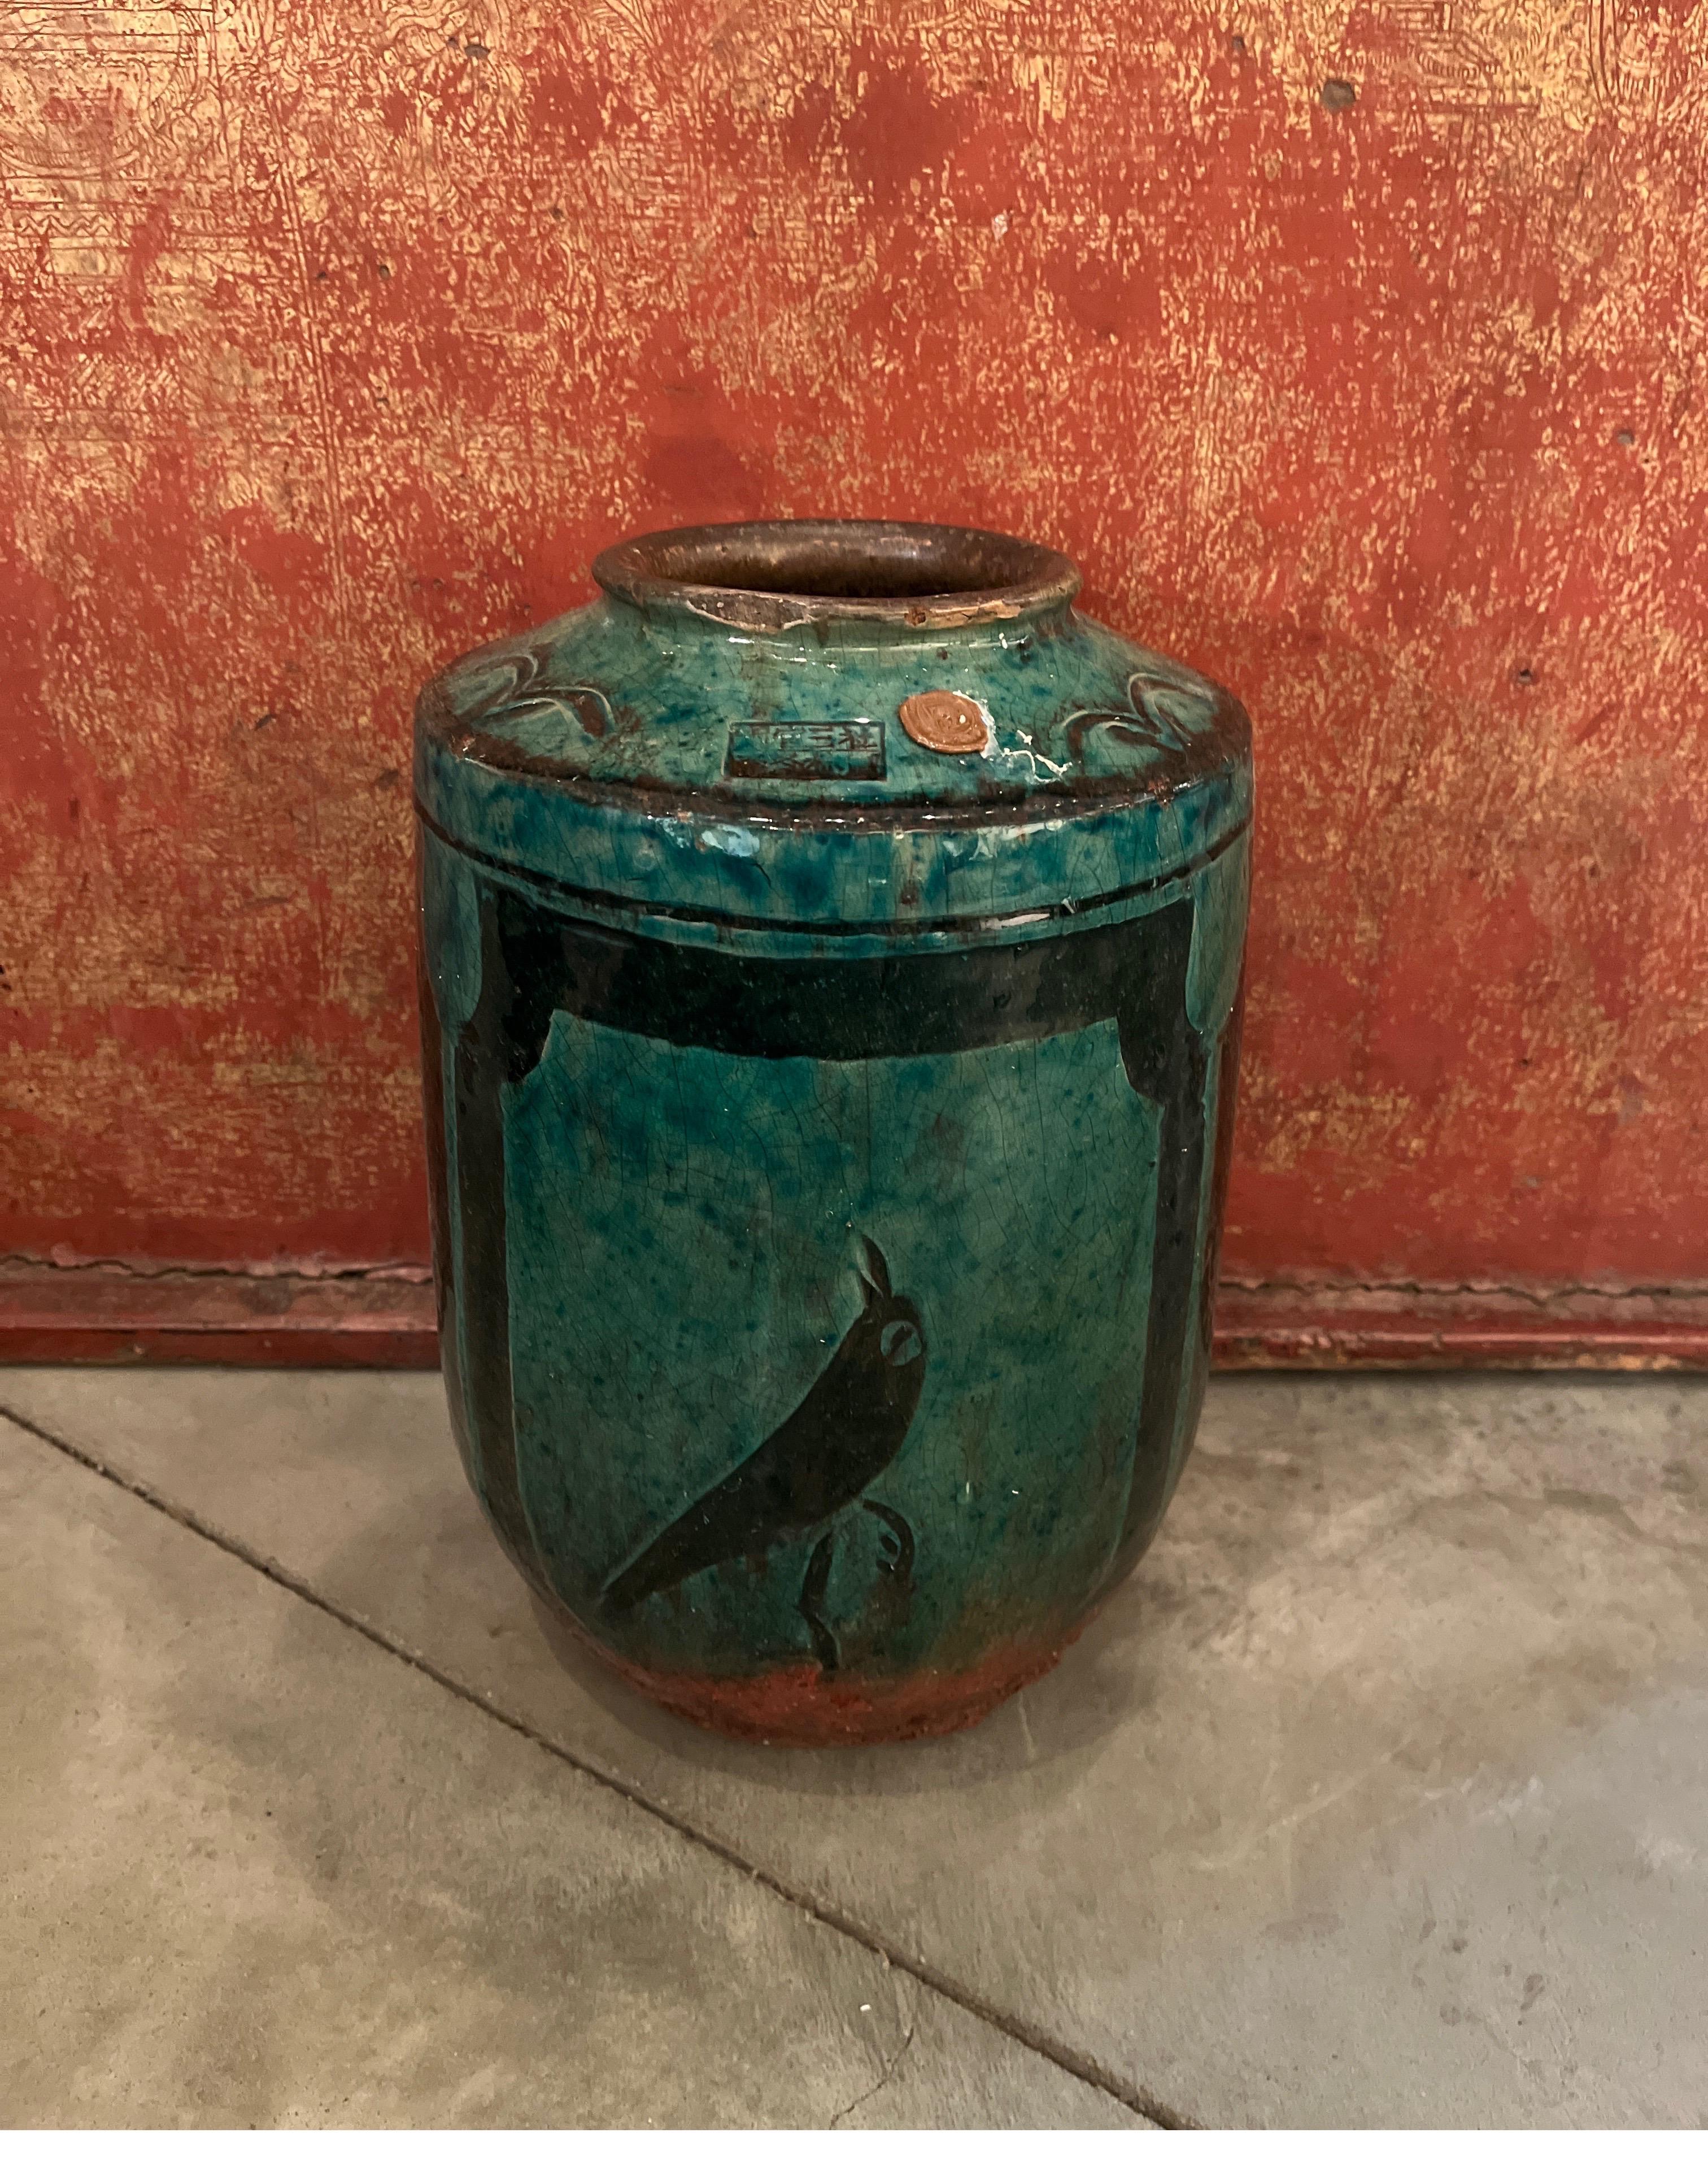 A beautifully glazed 19th Century Chinese ceramic food jar, emerald green in color, with a striking hand painted image of a bird, and two hand painted floral images.   This vase will stand out on a shelf or tabletop as an unusual, colorful and